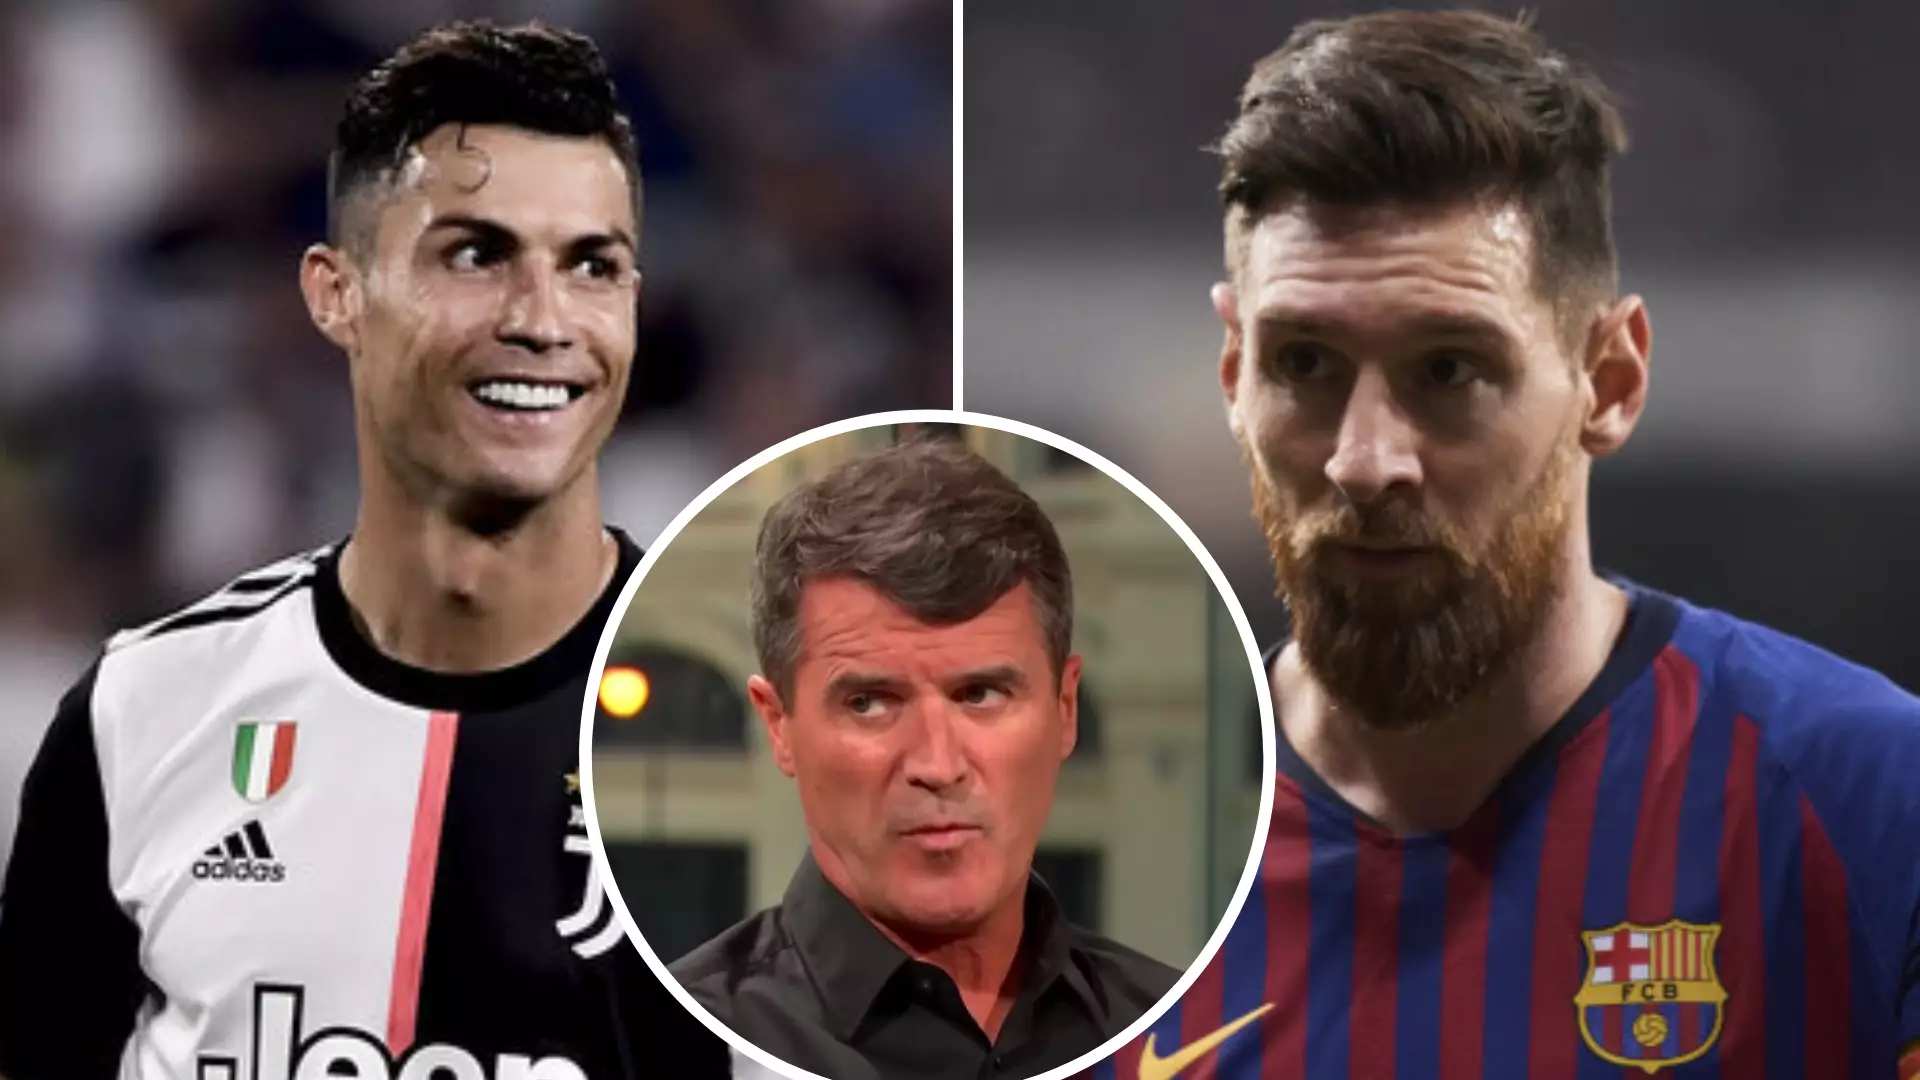 The One And Only Time Roy Keane Gave His Verdict On Cristiano Ronaldo Vs Lionel Messi Debate